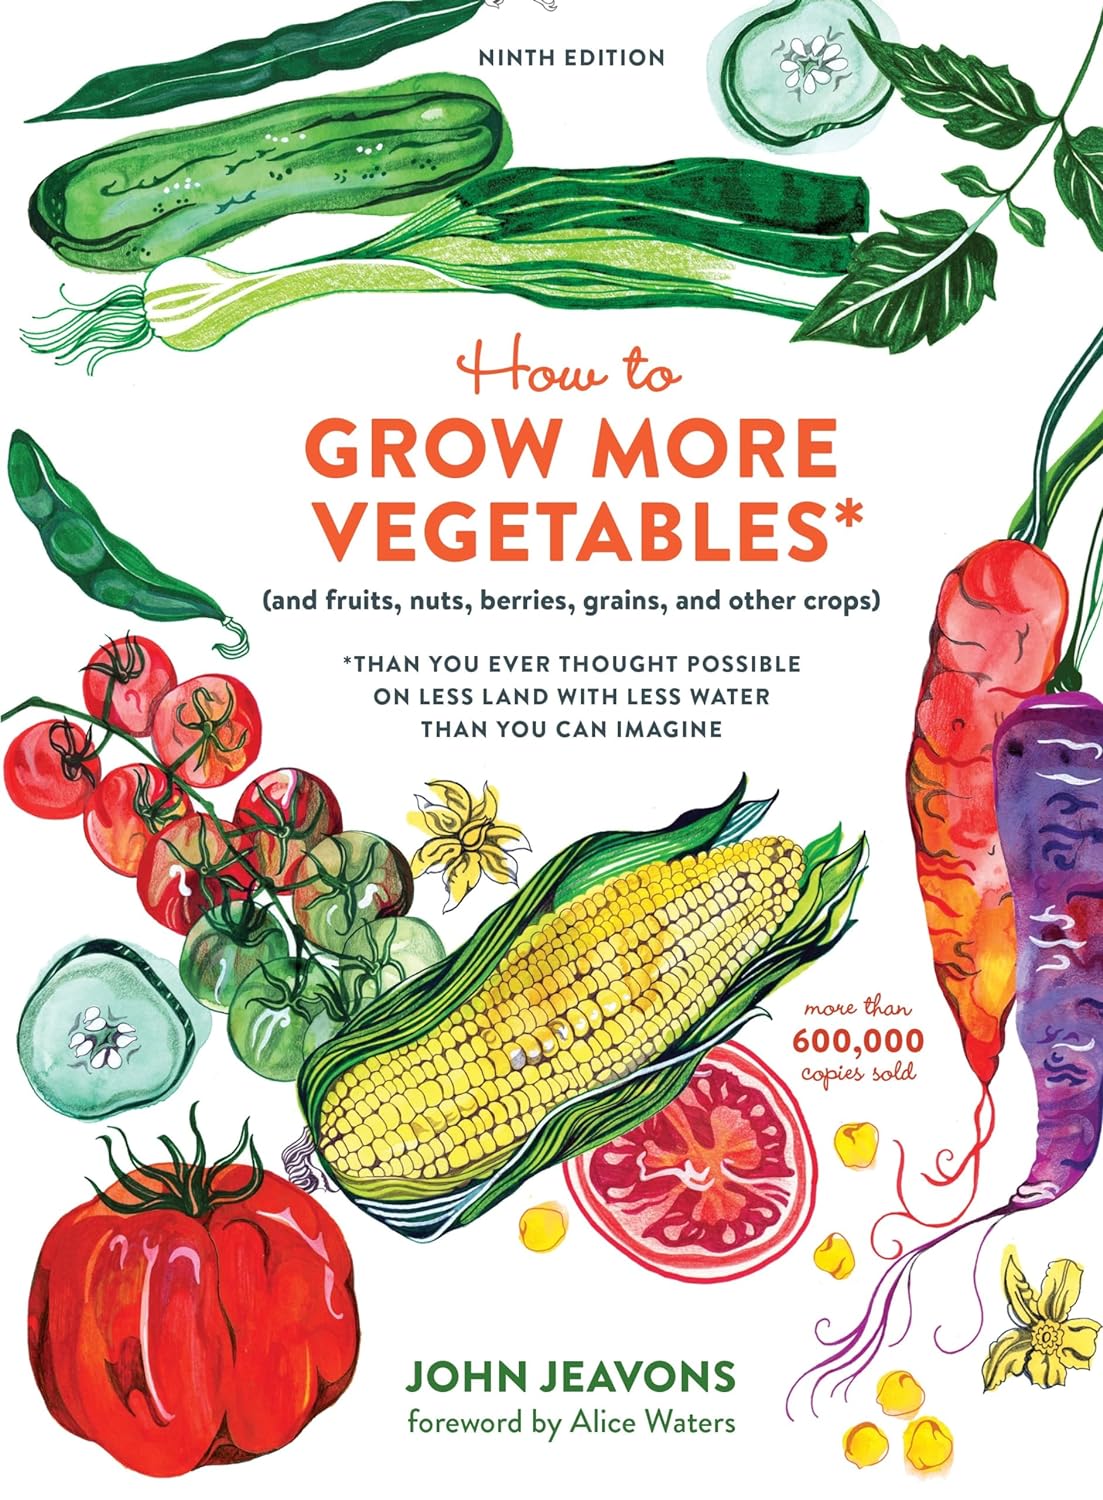 How to Grow More Vegetables, Ninth Edition: (and Fruits, Nuts, Berries, Grains, and Other Crops) Than You Ever Thought Possible on Less Land with Less Water Than You Can Imagine - by John Jeavons